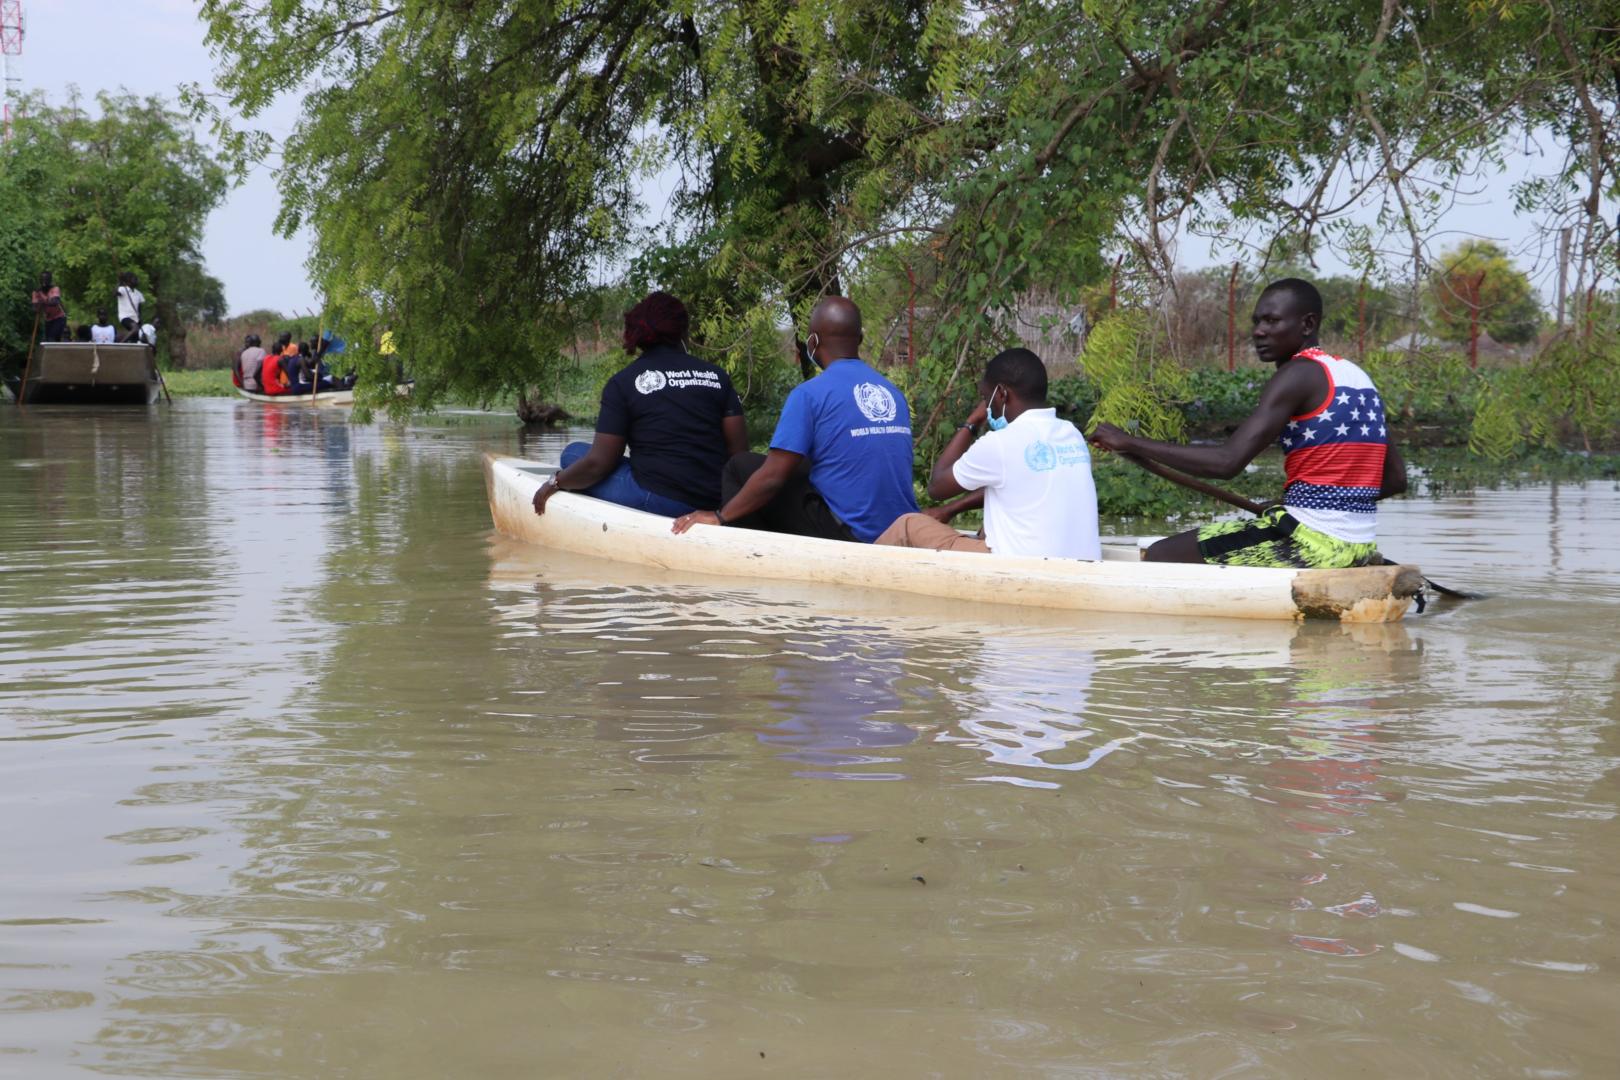 In flooded areas in South Sudan, WHO personnel use canoes to provide much-needed healthcare services. 